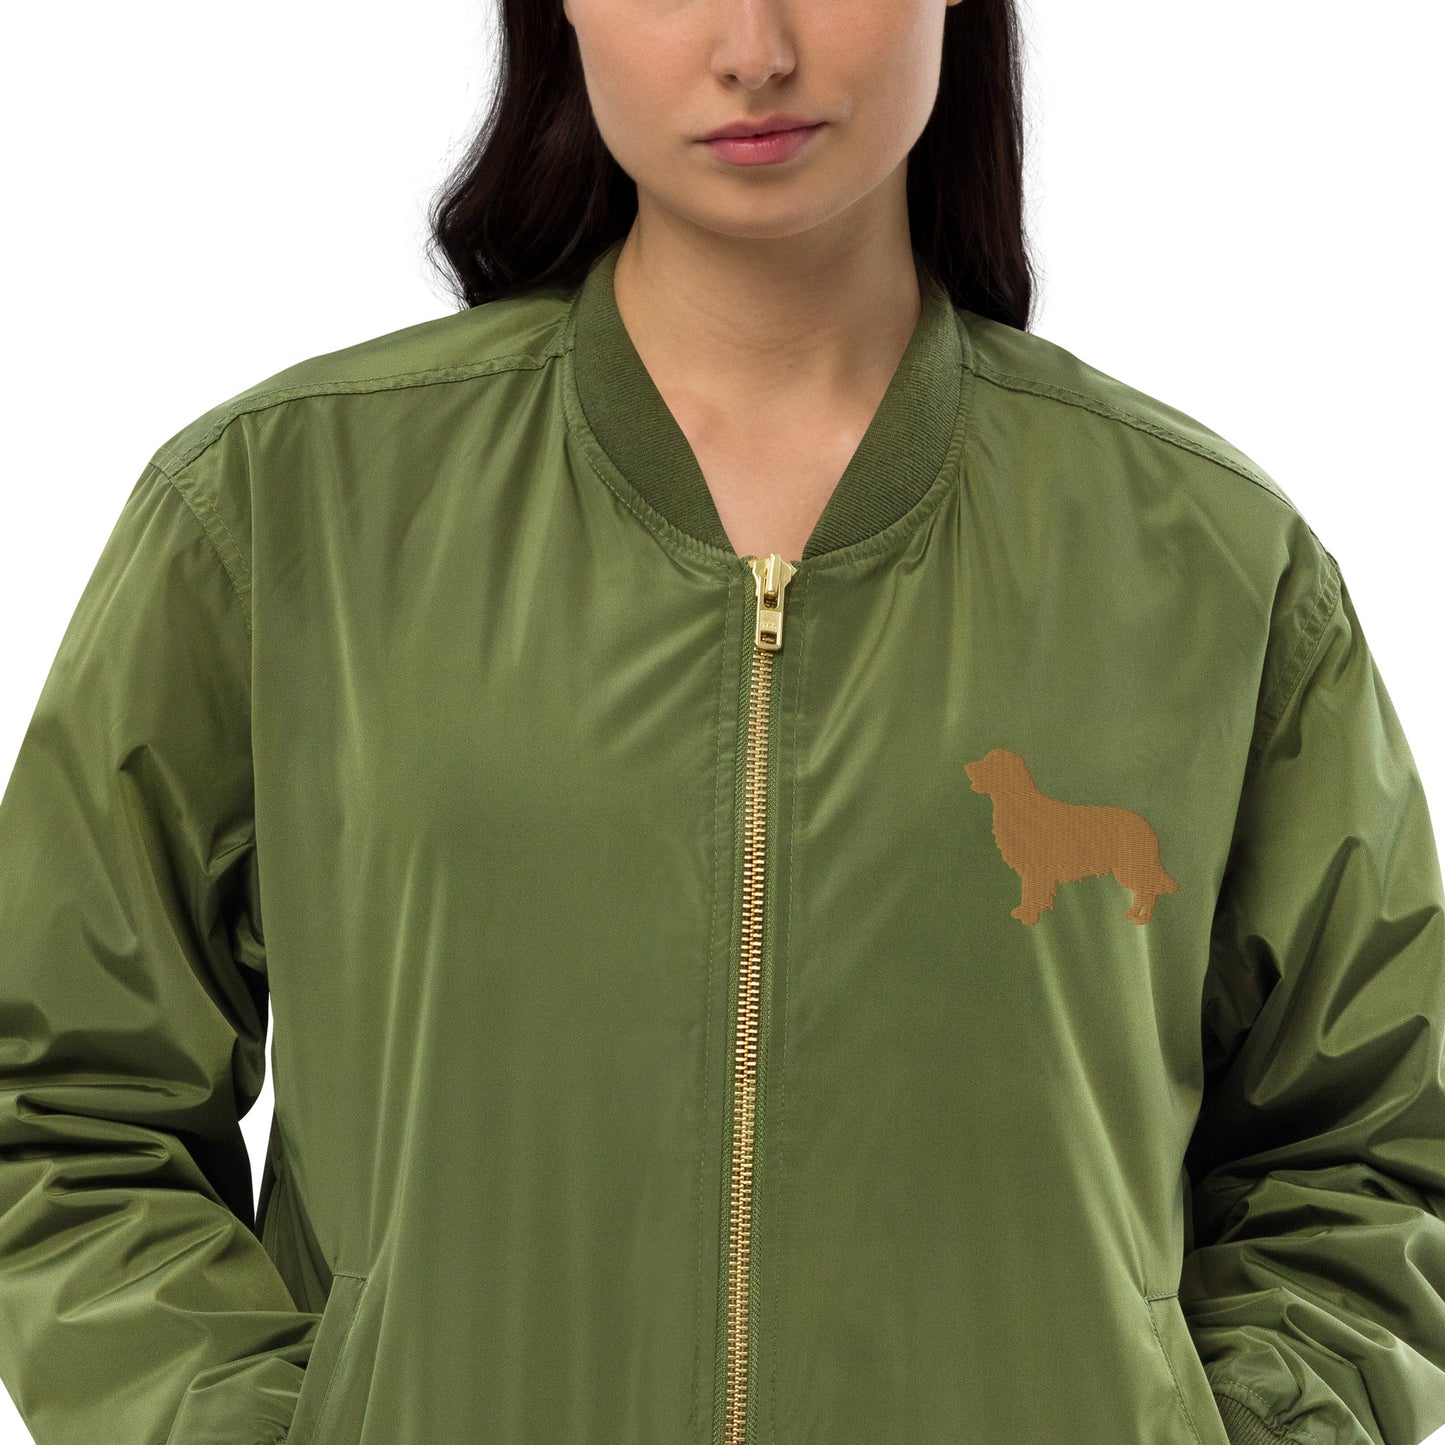 Rigby's Premium recycled bomber jacket